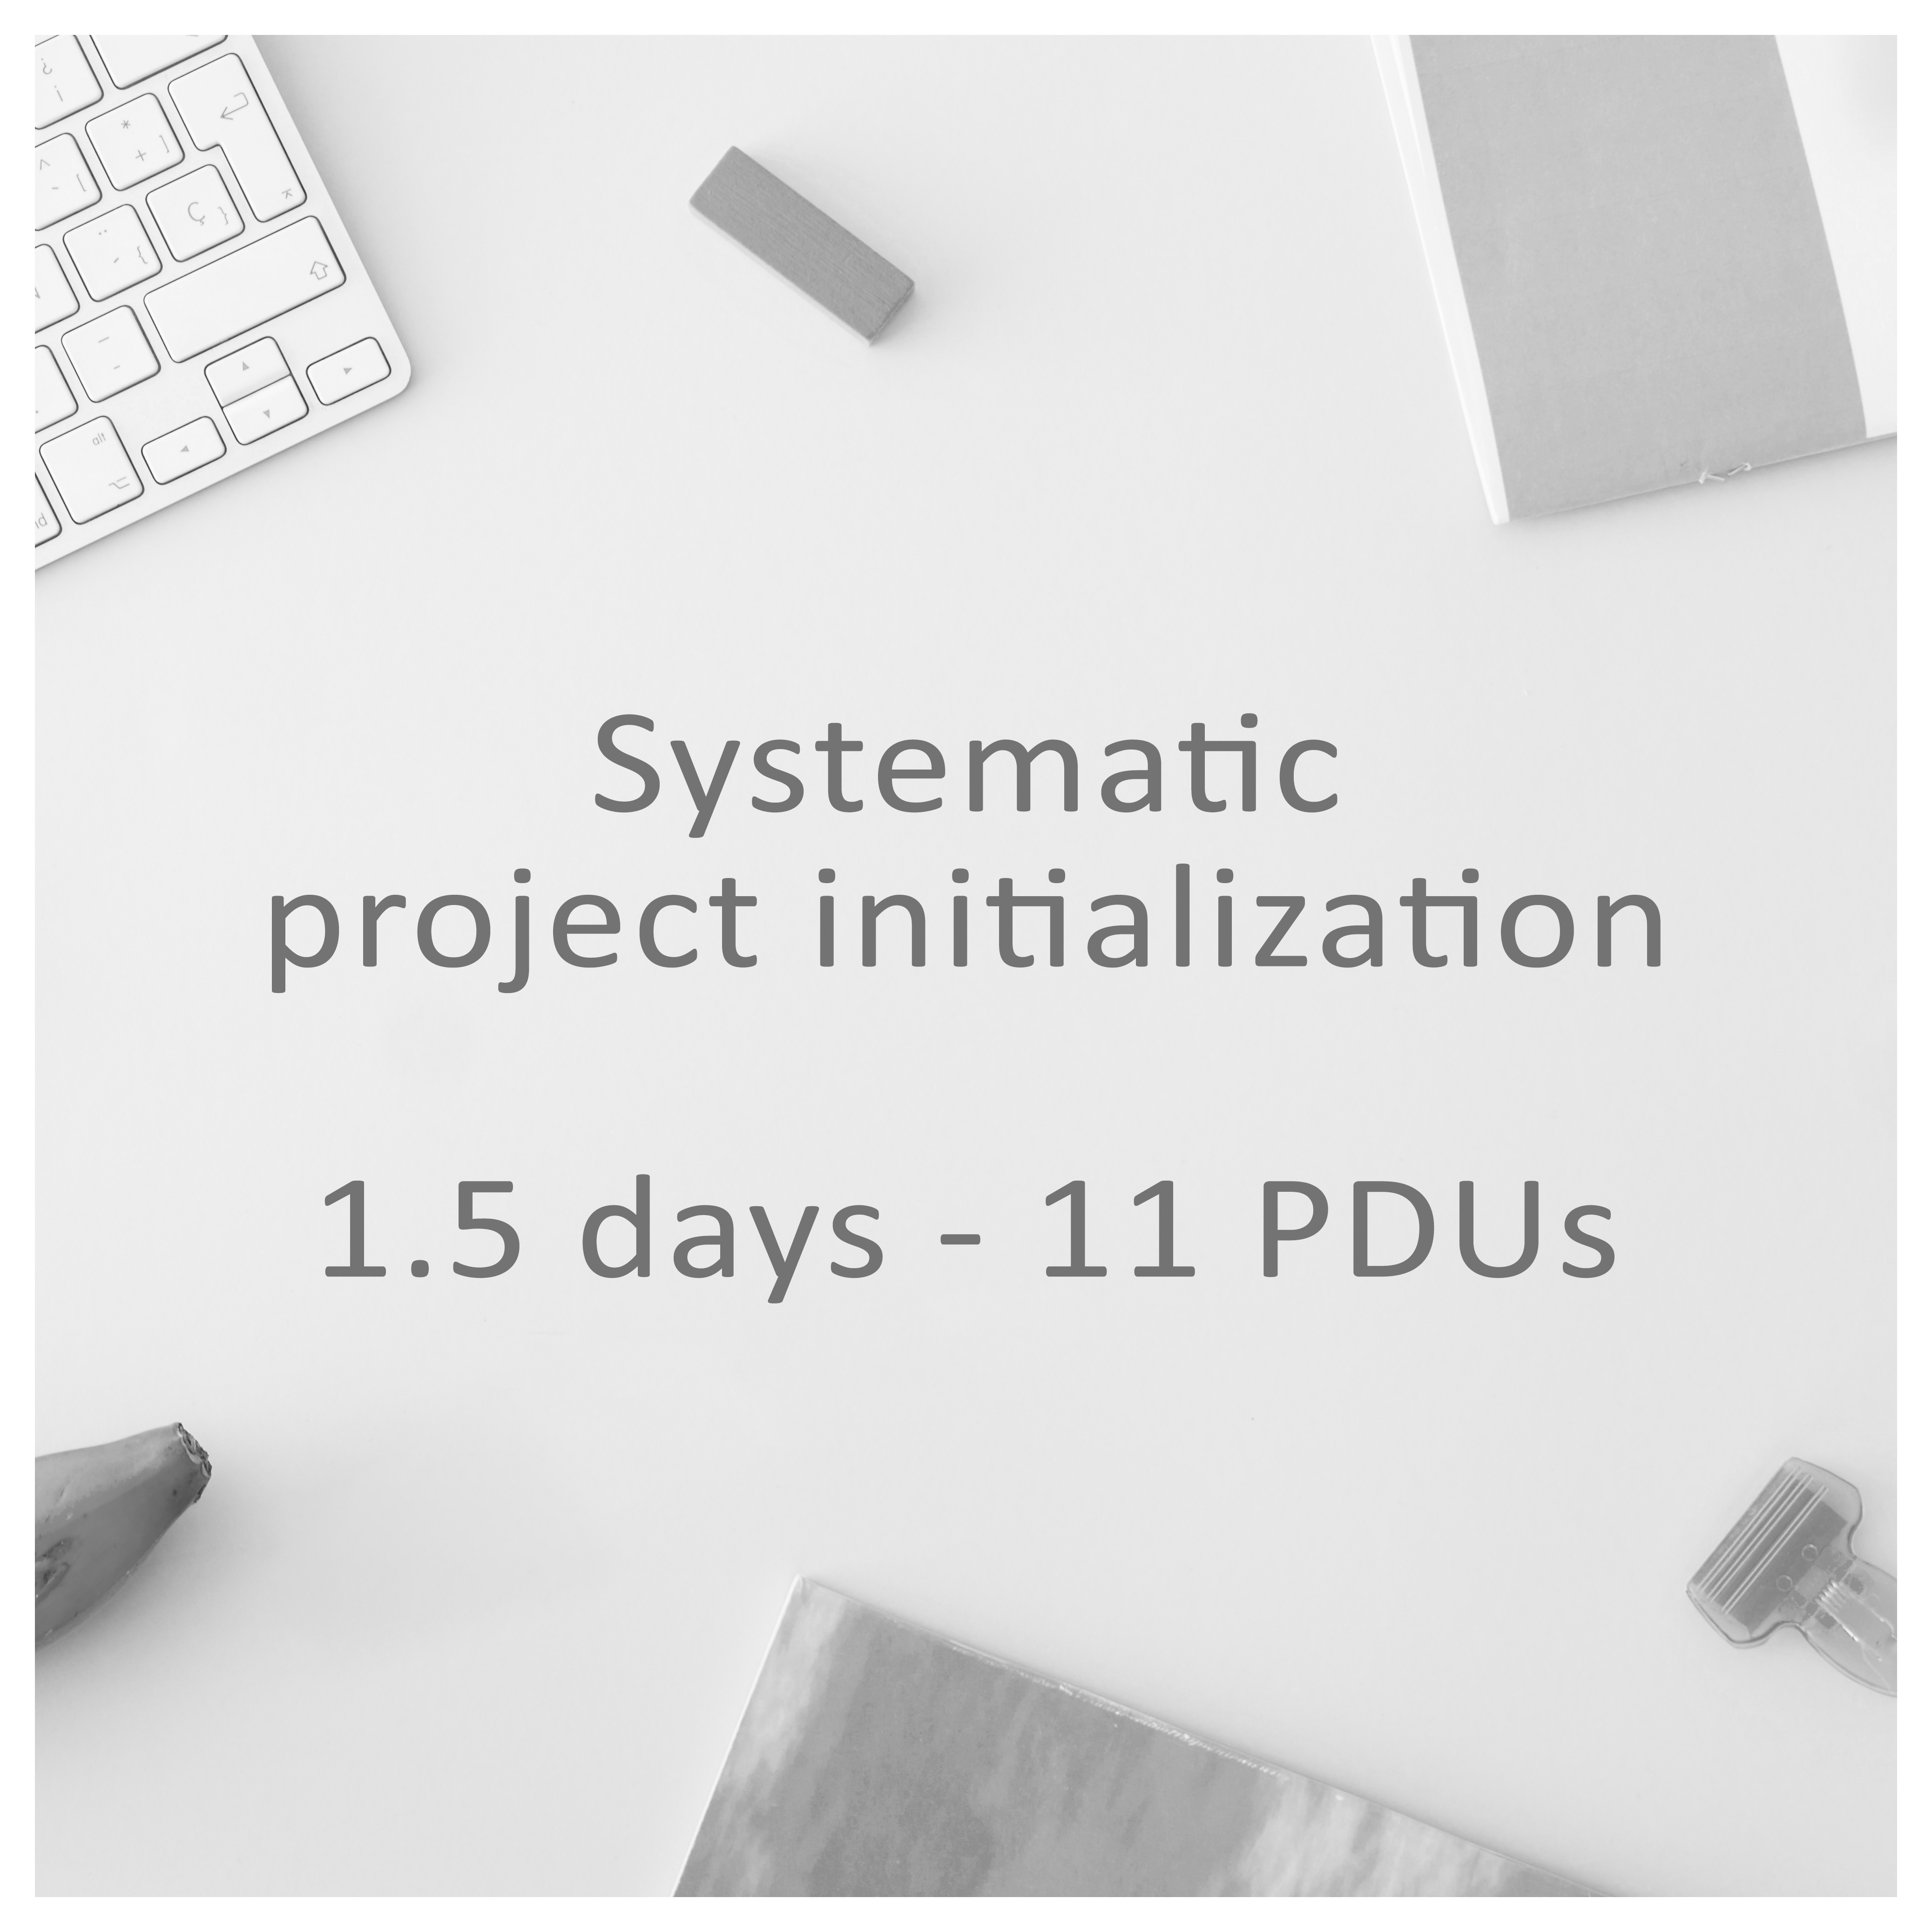 Systematic project initialization